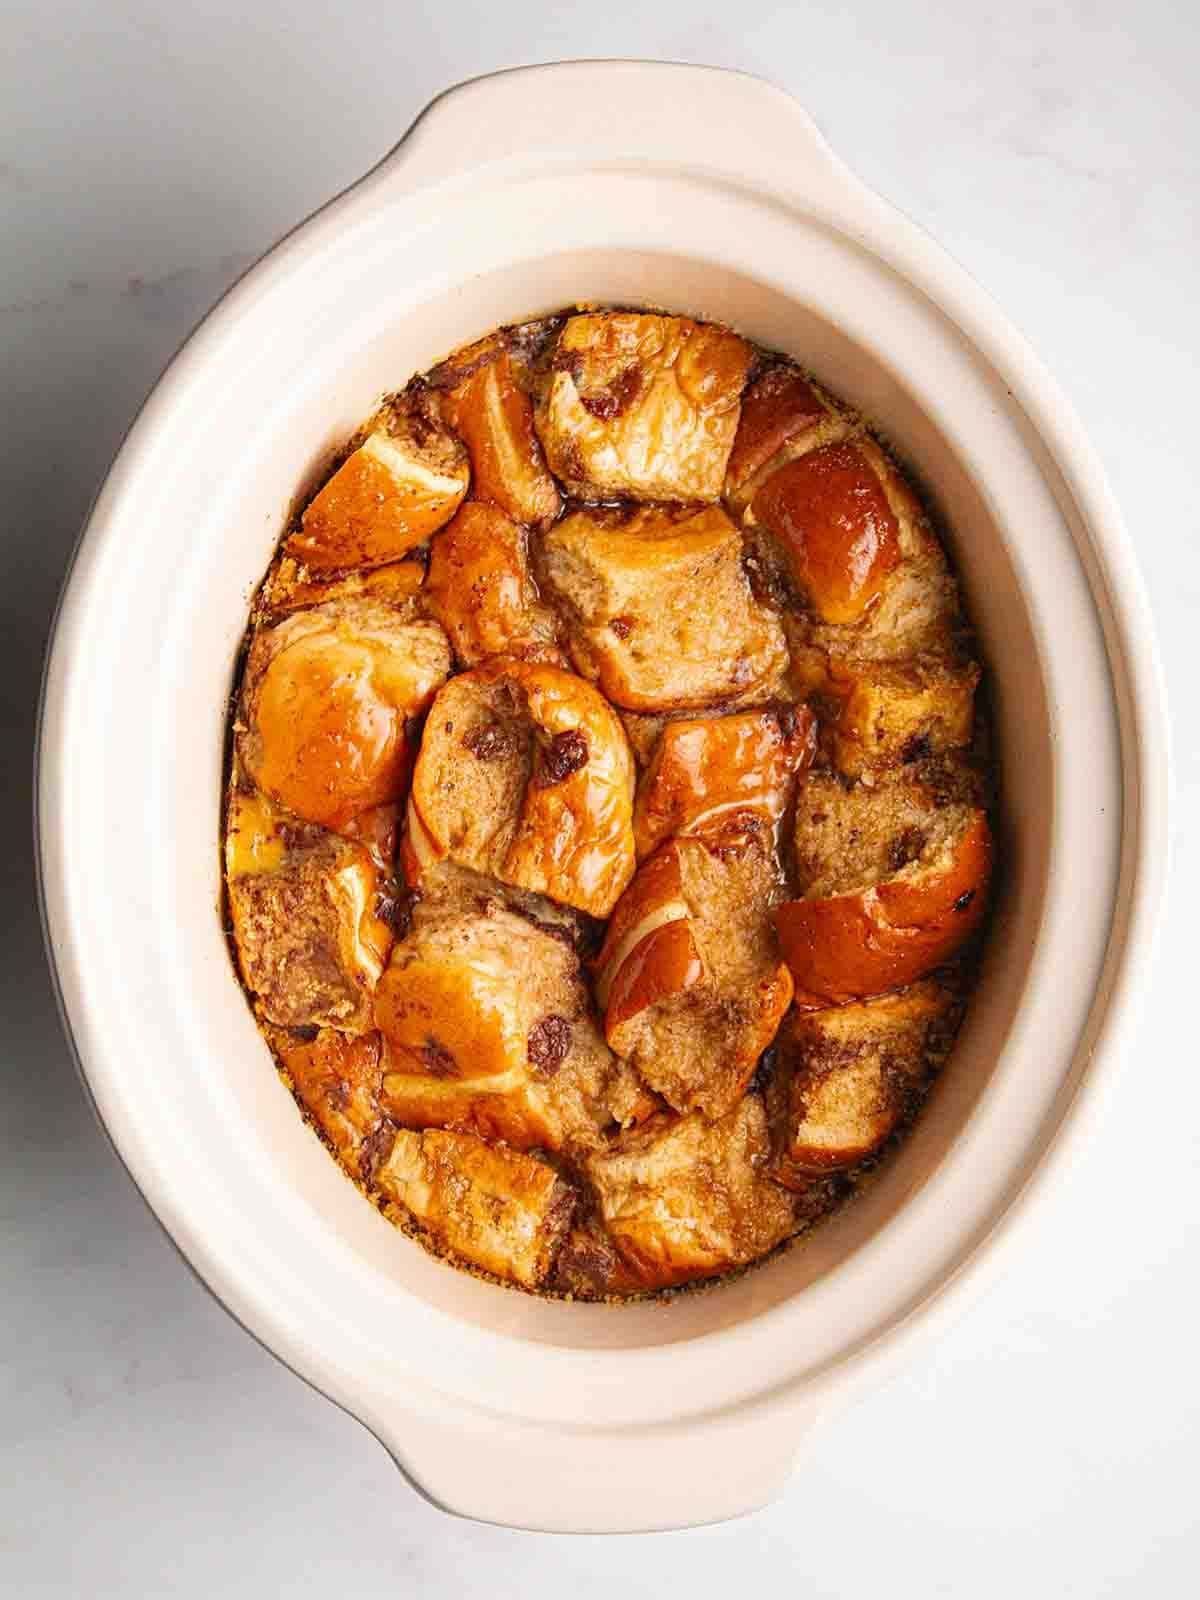 A slow cooker pan with cooked Hot Cross Bun Bread and Butter Pudding inside.